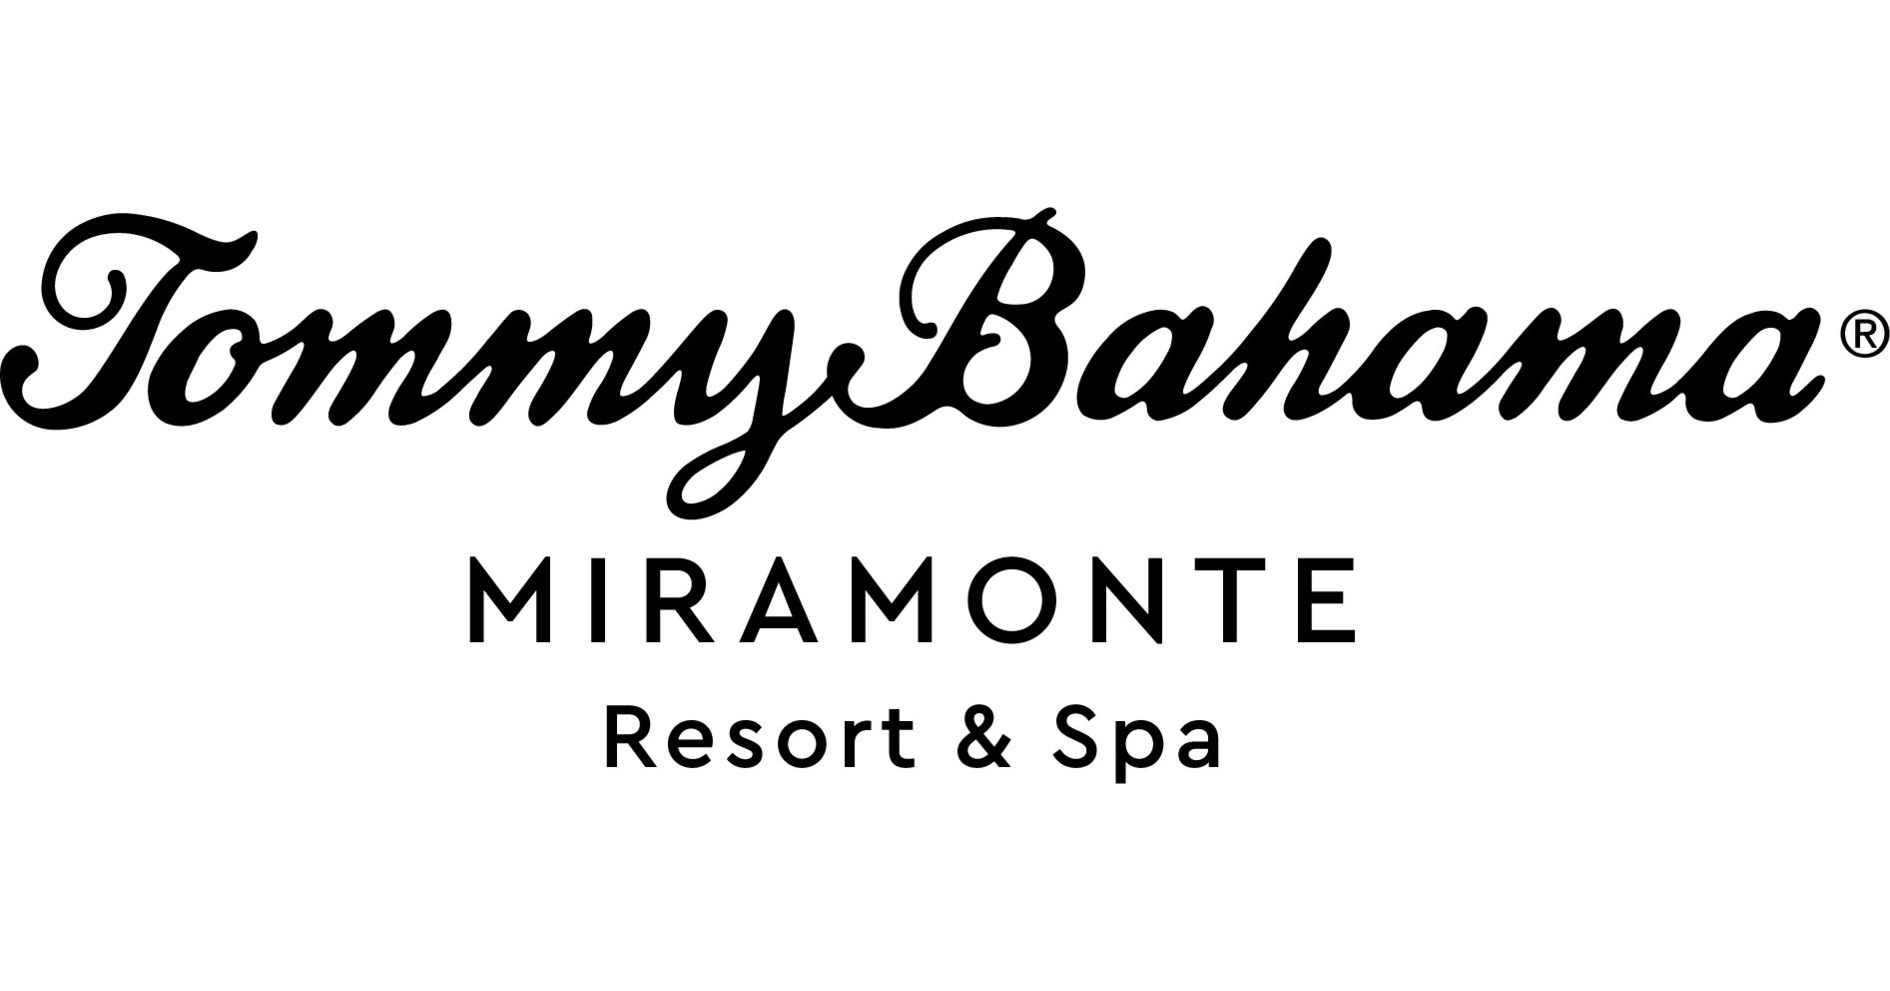 Tommy Bahama will brand a resort in Southern California: Travel Weekly